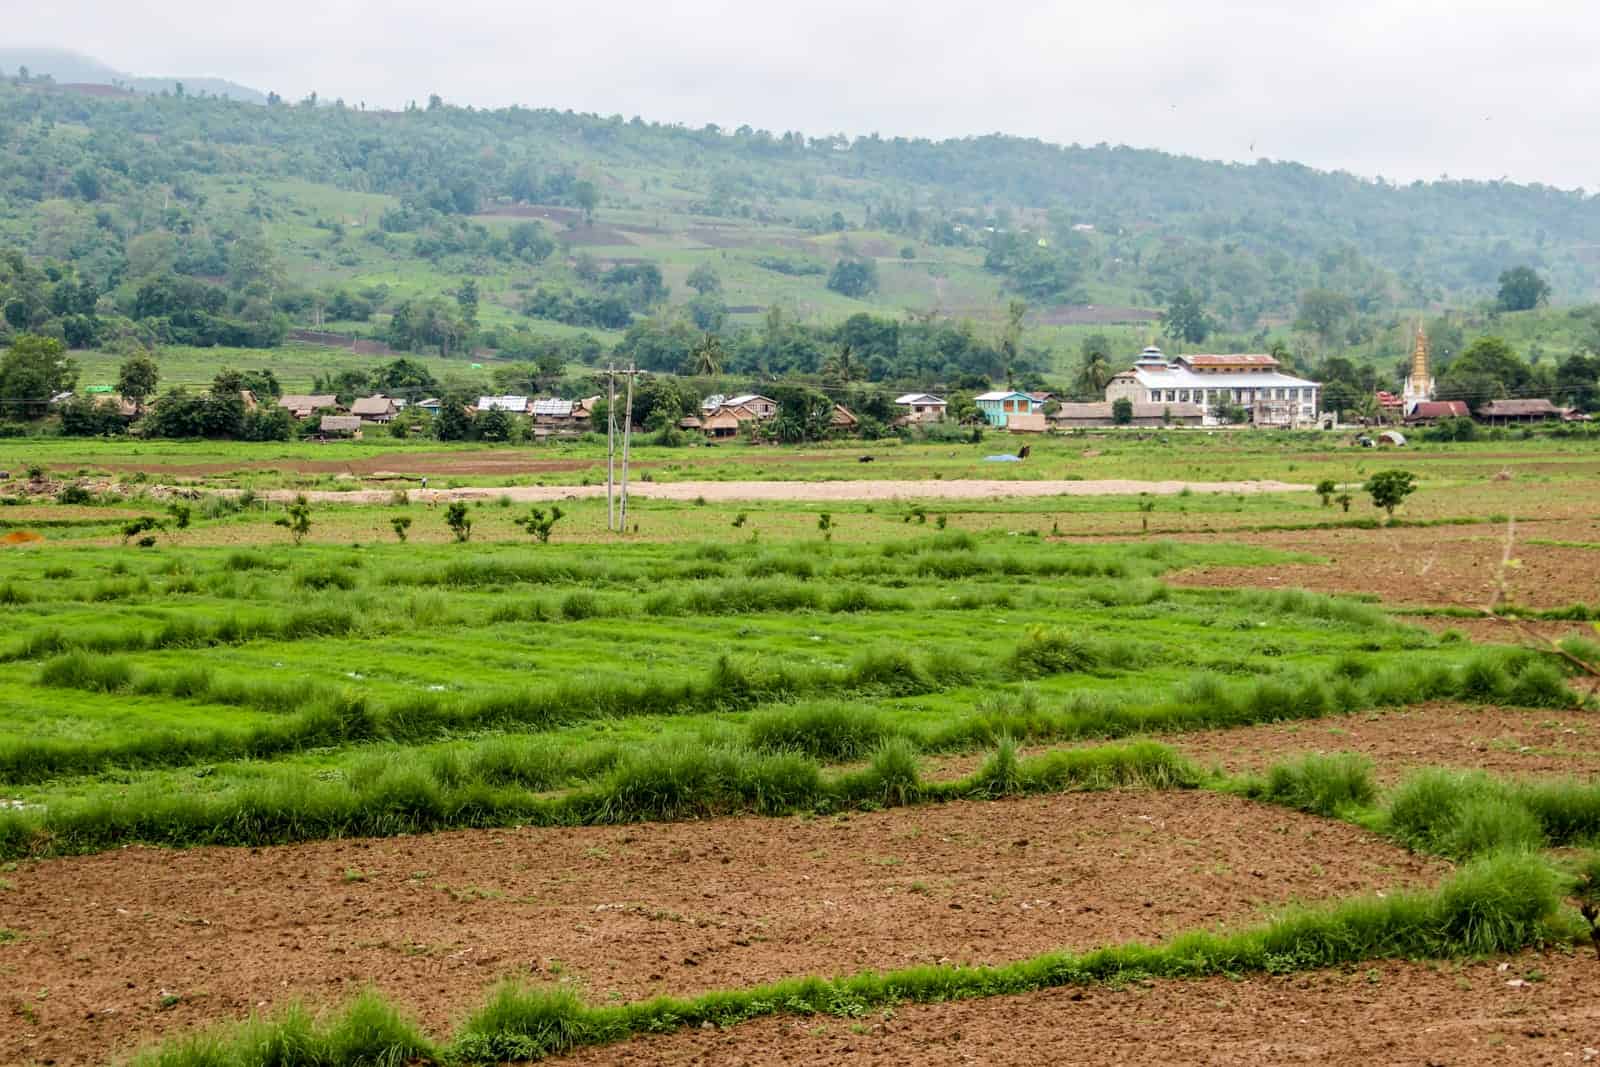 View of Hsipaw Myanmar from a train window